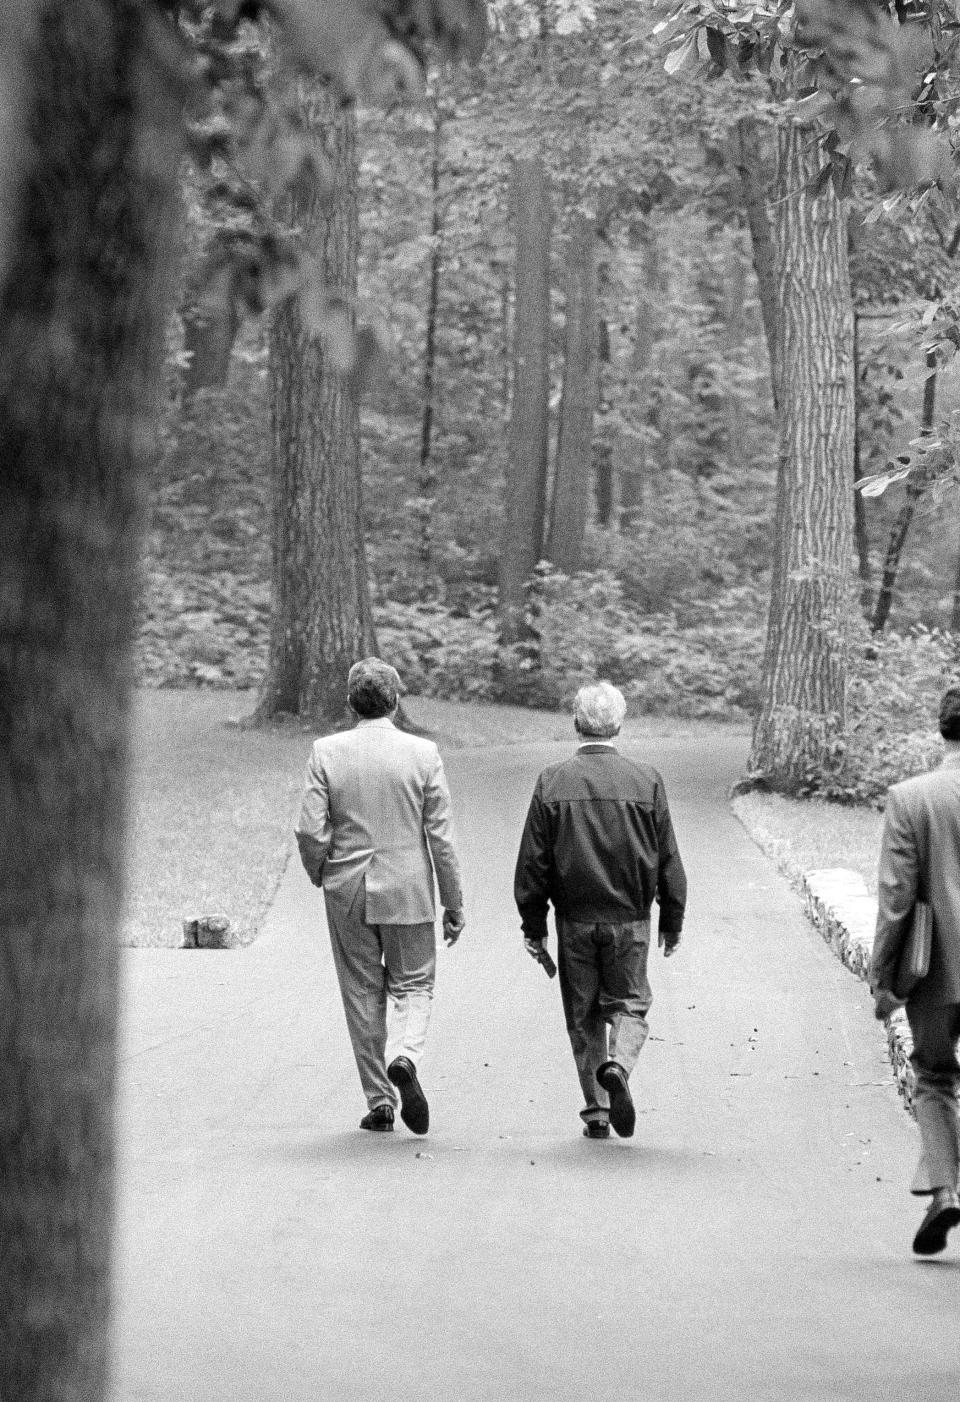 Soviet leader Leonid I. Brezhnev, right, and President Richard Nixon walk down a path at the presidential retreat at Camp David, Md., June 20, 1973, as they hold talks.